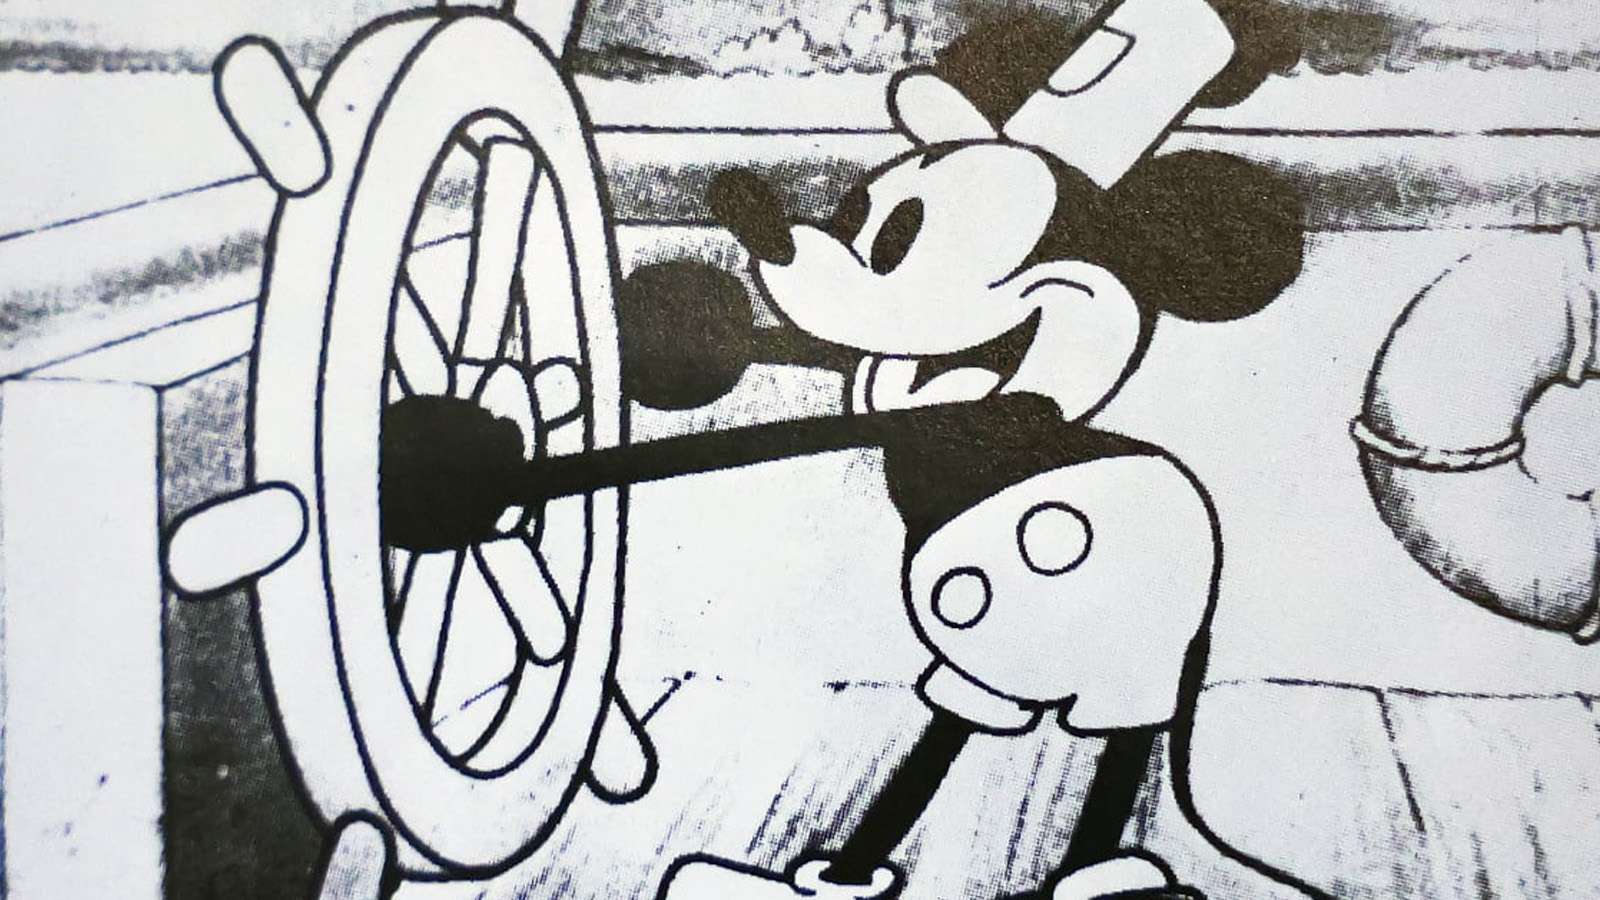 Footage from Steamboat Willie